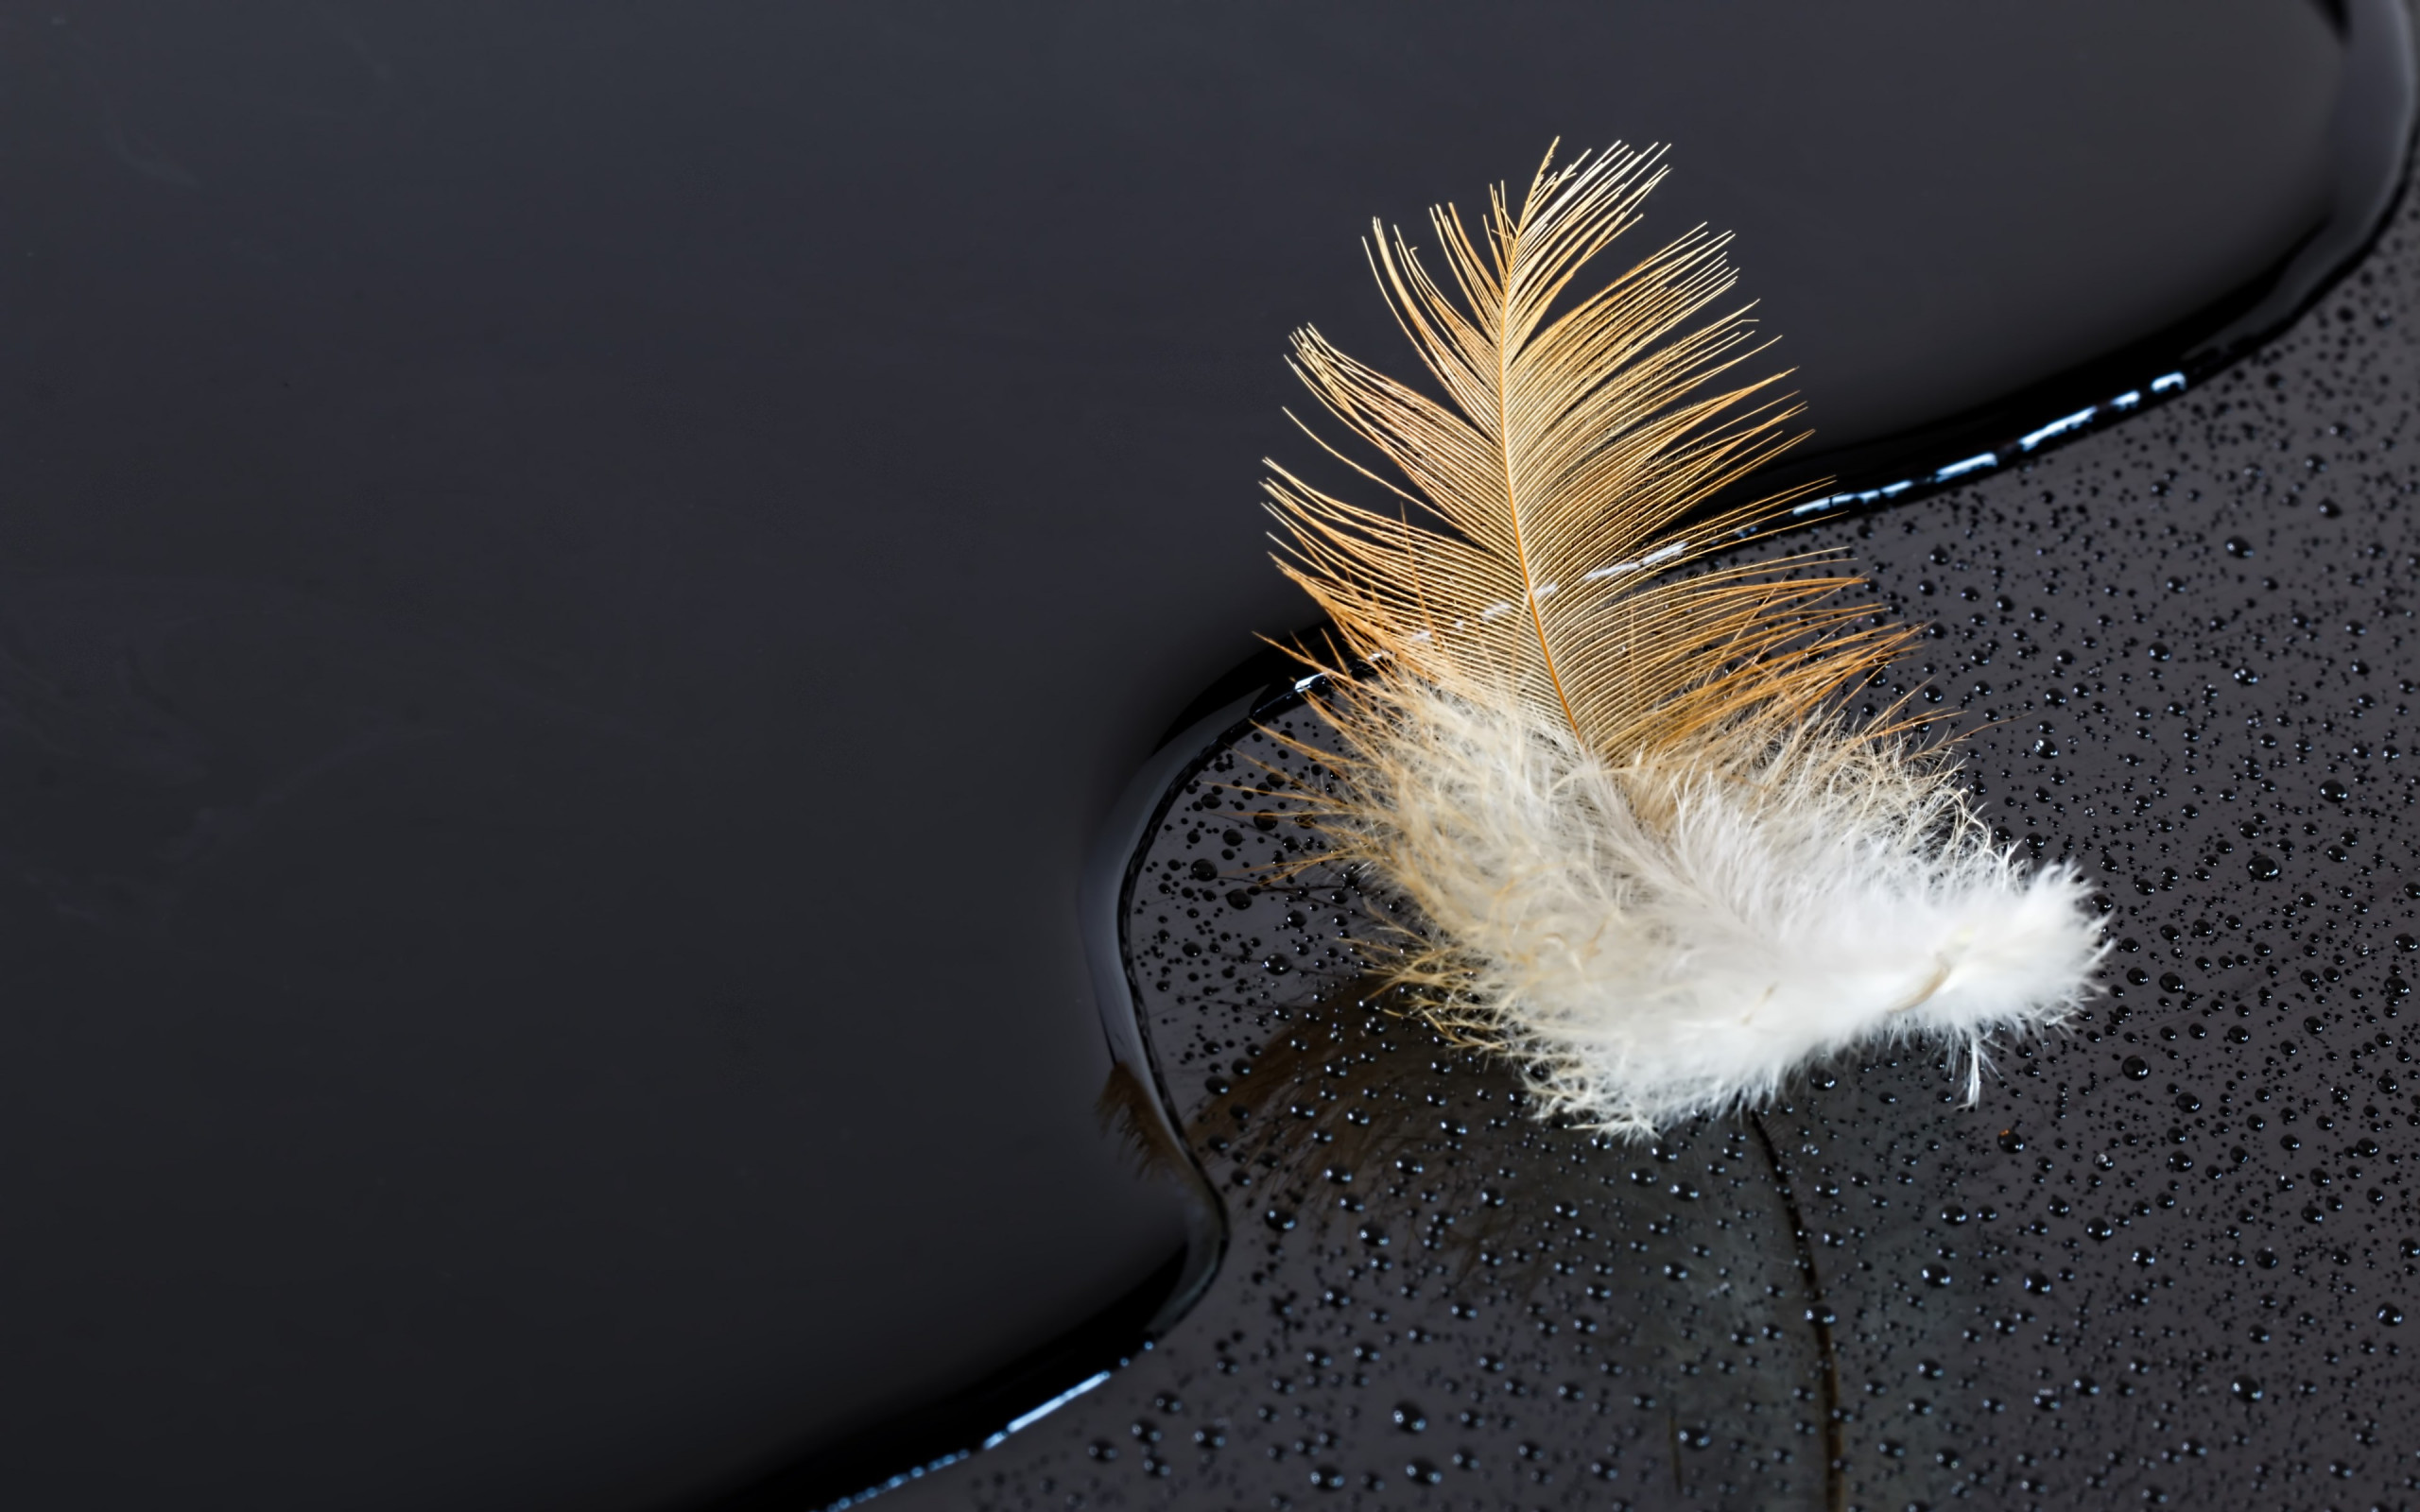 Dark surface with a feather on water wallpaper 2560x1600